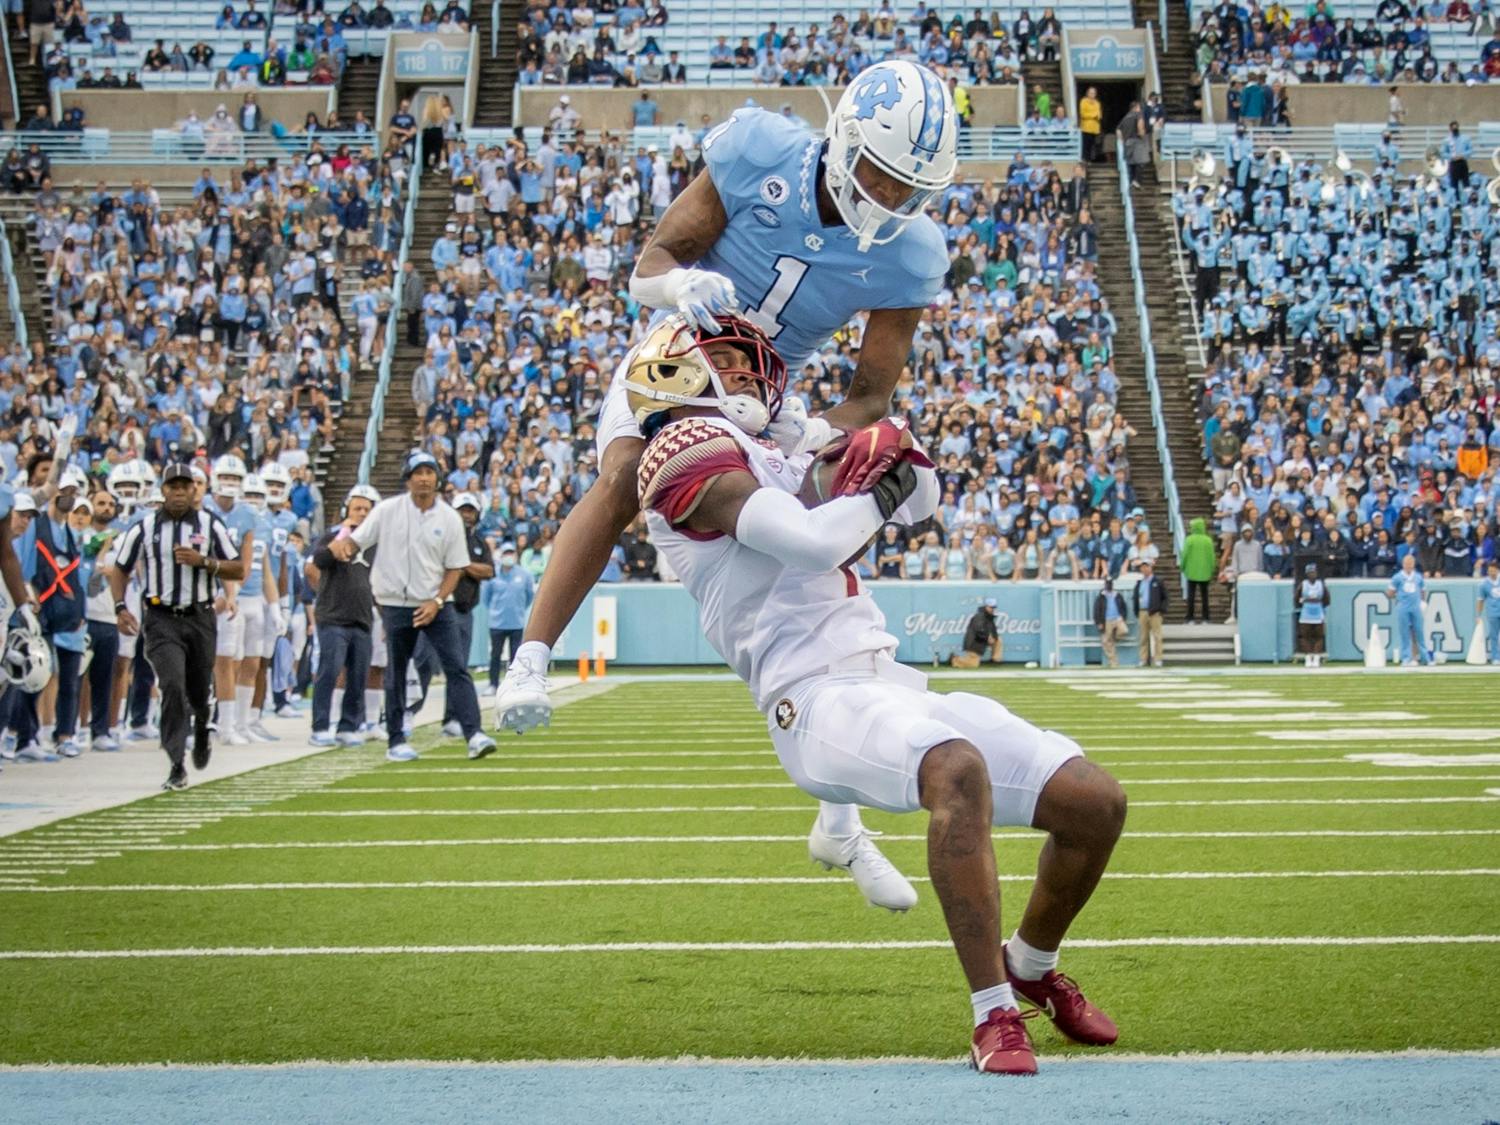 FSU sophomore defensive back Jarrian Jones (7) intercepts a long pass intended for UNC sophomore wide receiver Khafre Brown (1) during the Tar Heels' home football matchup in Kenan Memorial Stadium on Oct. 9, 2021, against the Florida State Seminoles. FSU won 35-25.